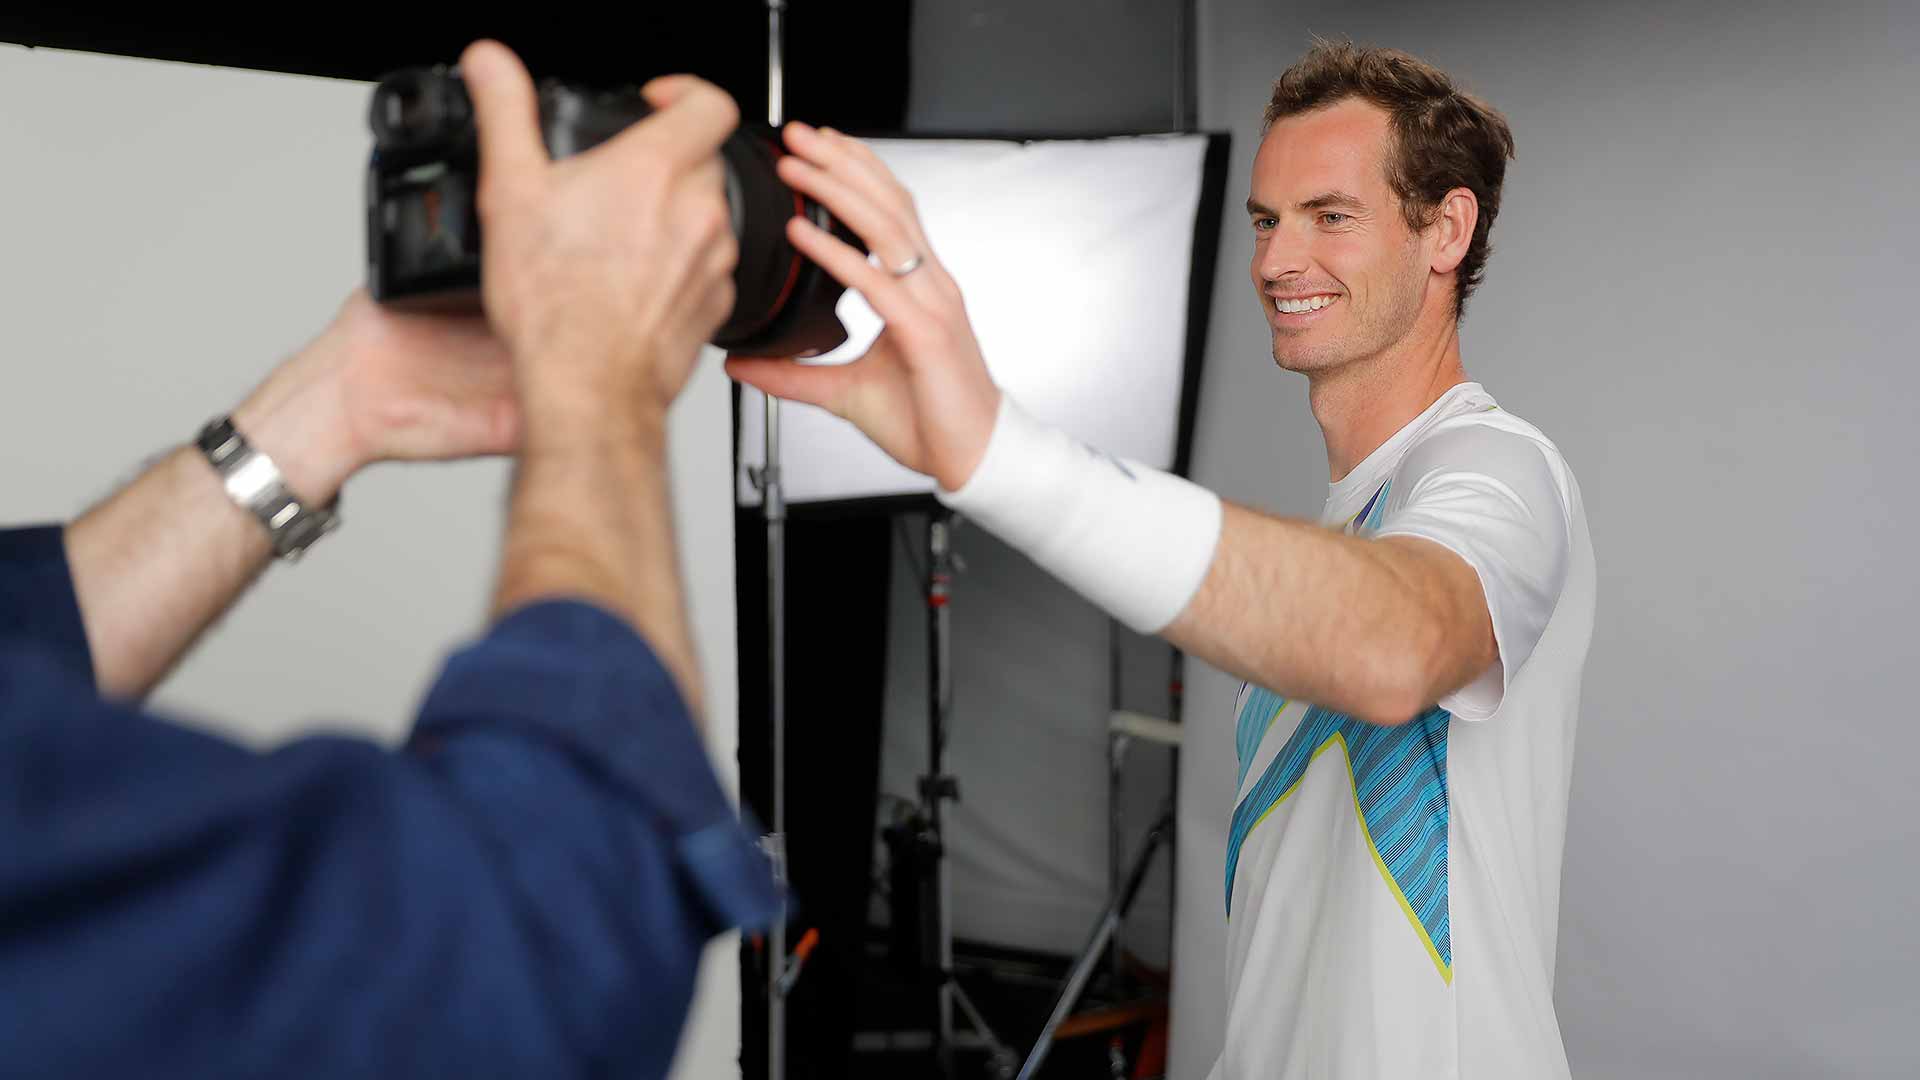 <a href='https://www.atptour.com/en/players/andy-murray/mc10/overview'>Andy Murray</a> at the 2022 ATP/WTA Super Shoot in Indian Wells.